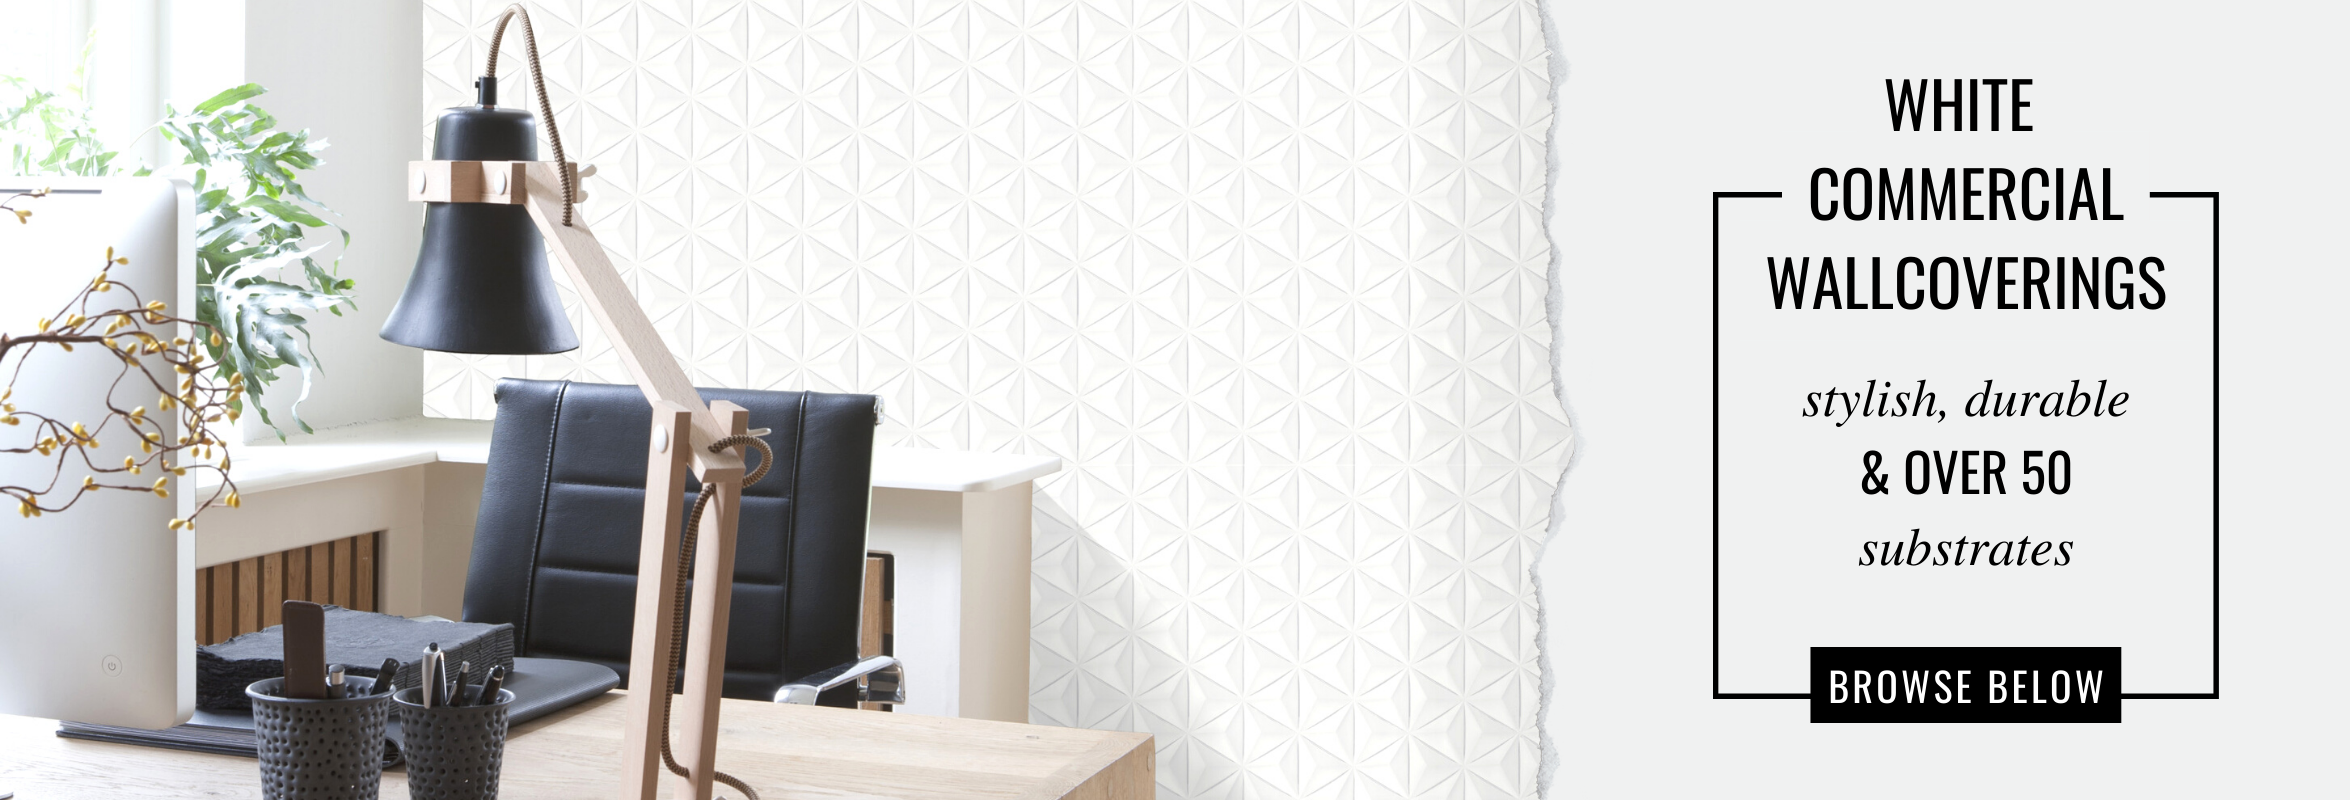 White Commercial Wallcoverings